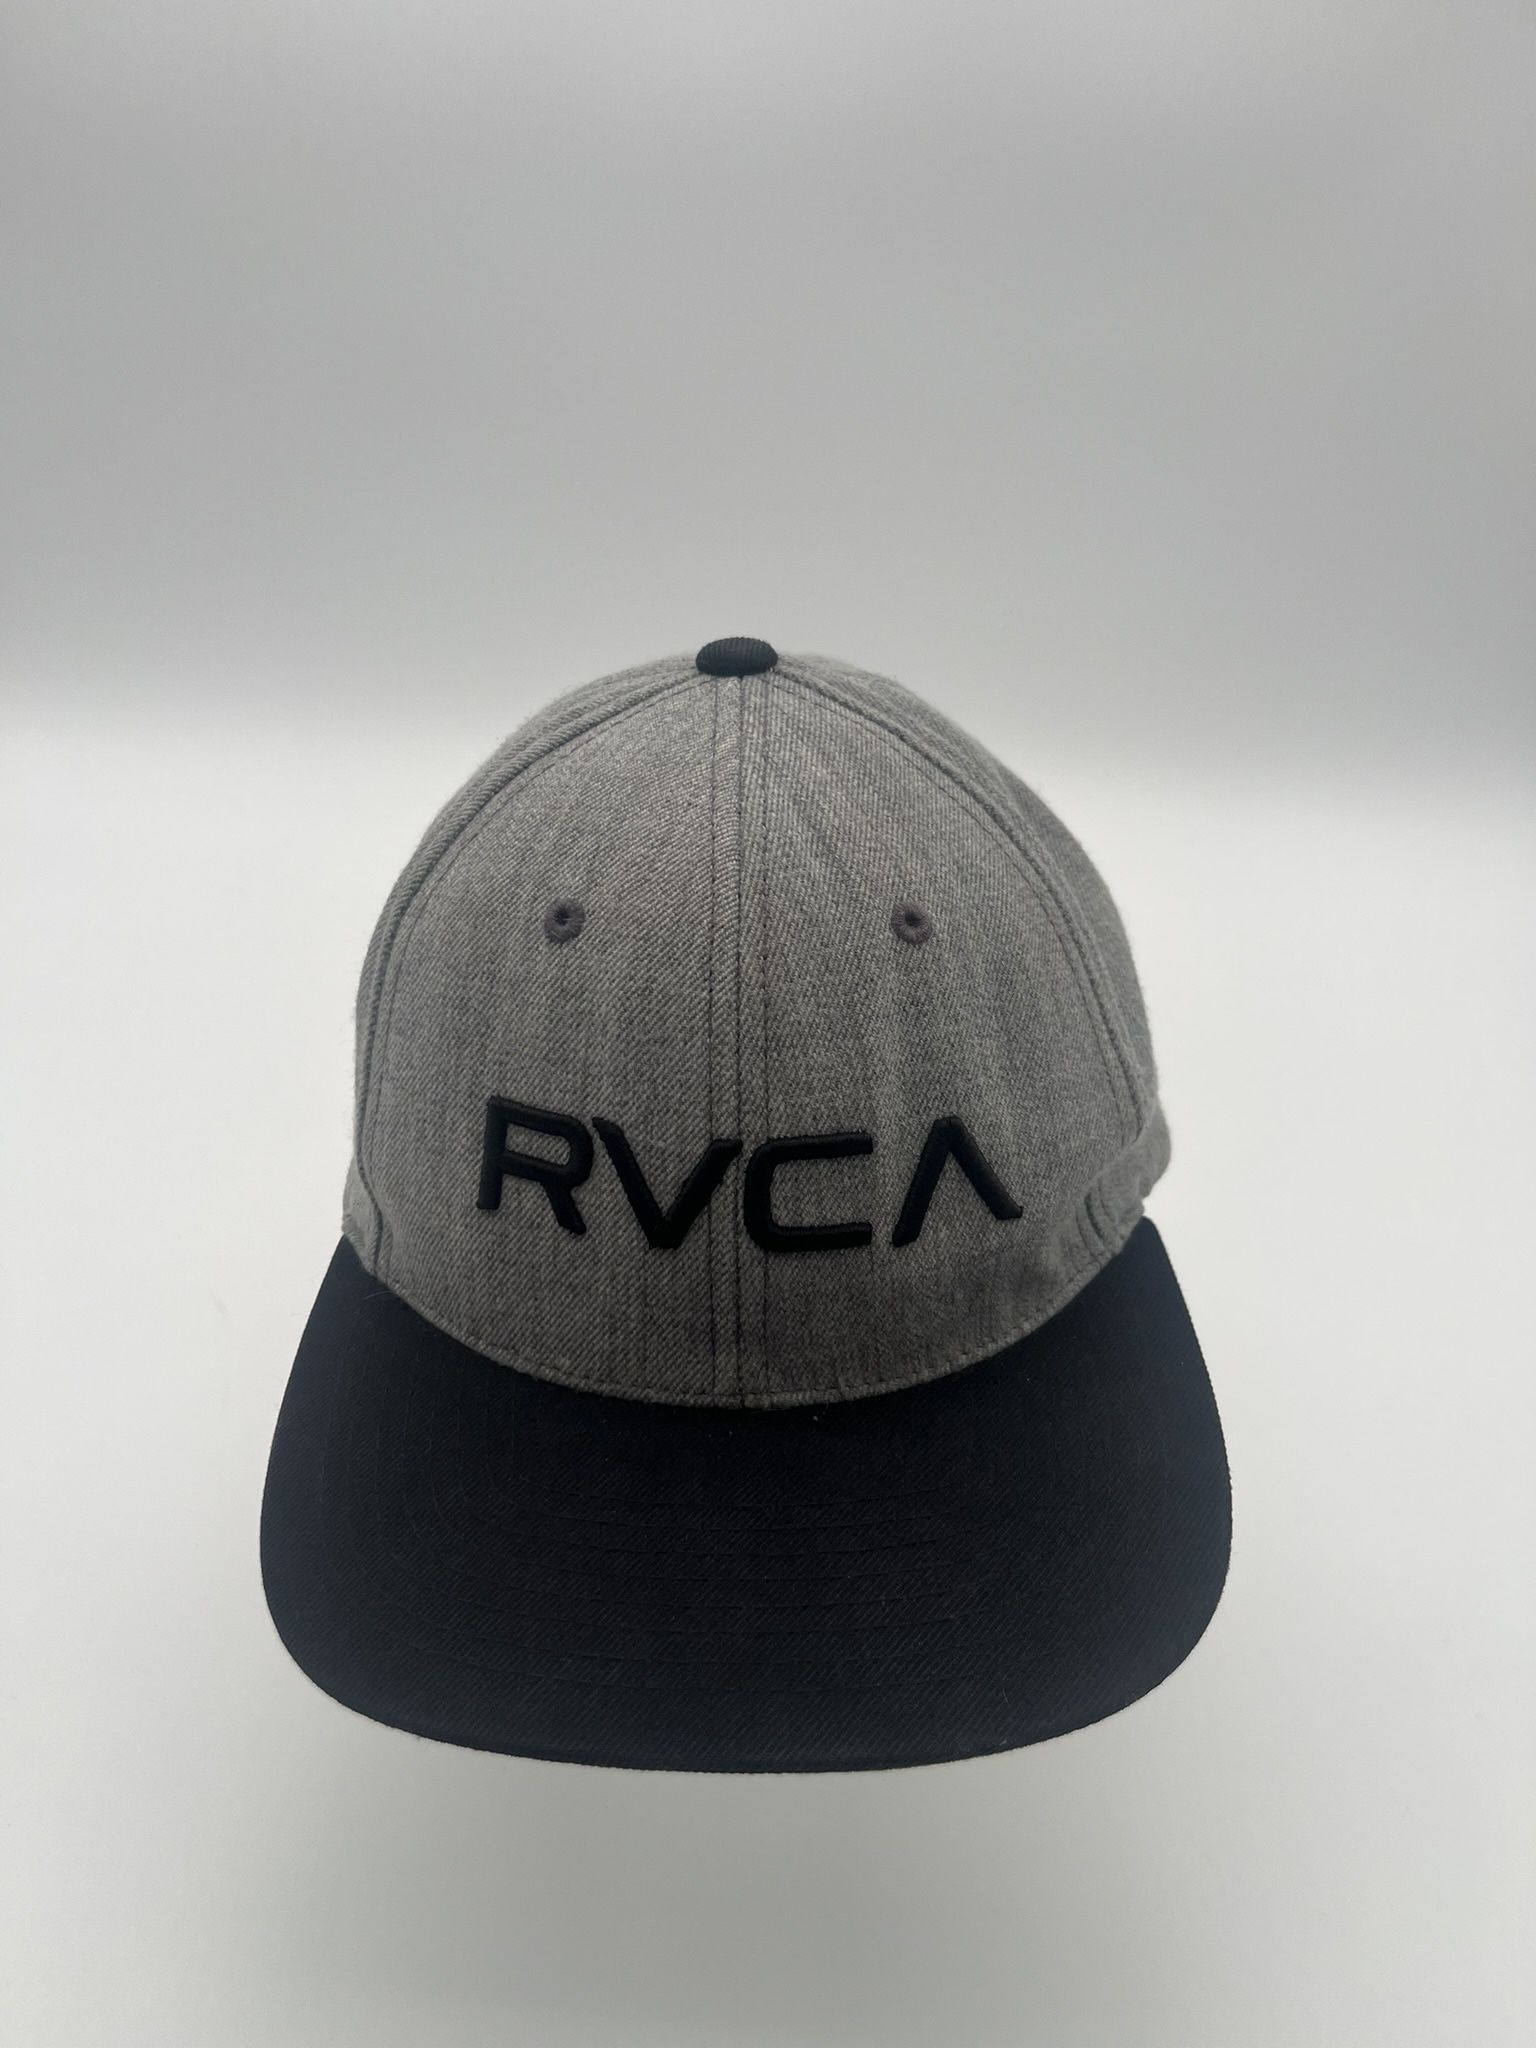 (43) RVCA Hat Size One Size Fits All 